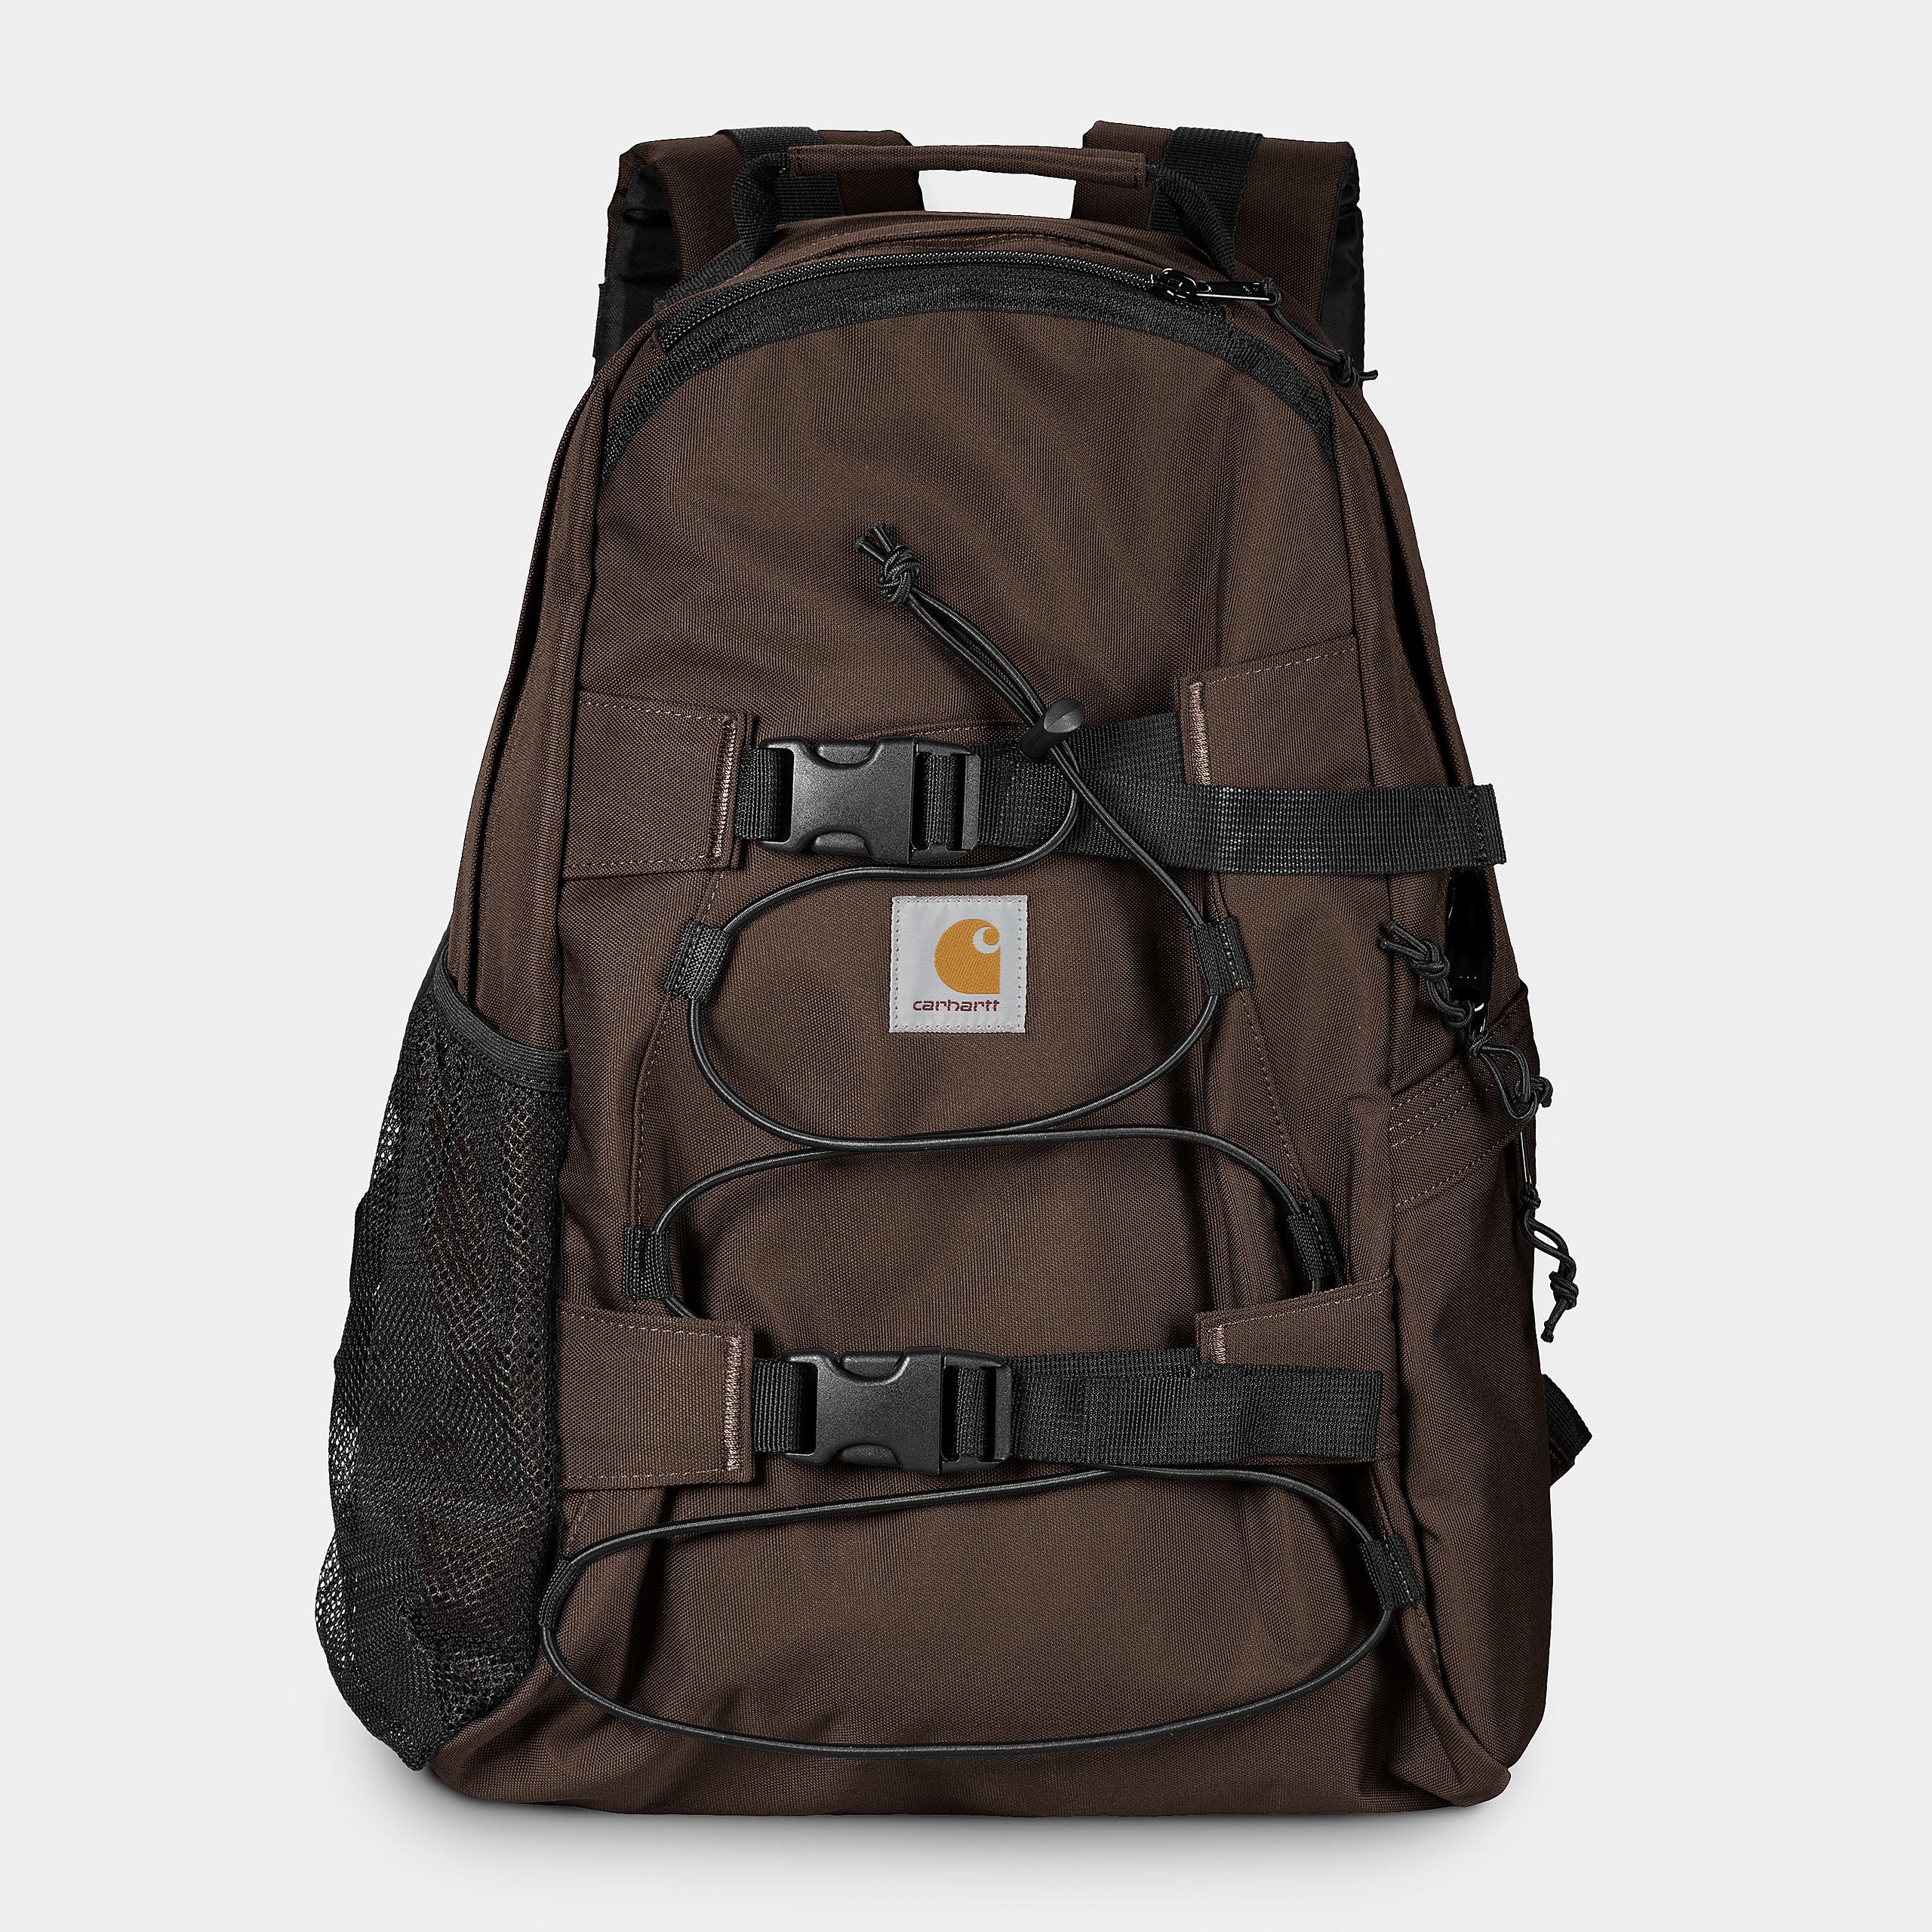 Carhartt Wip Kickflip Backpack Recycled Polyester Canvas, 11.25 Oz Tobacco --- Men